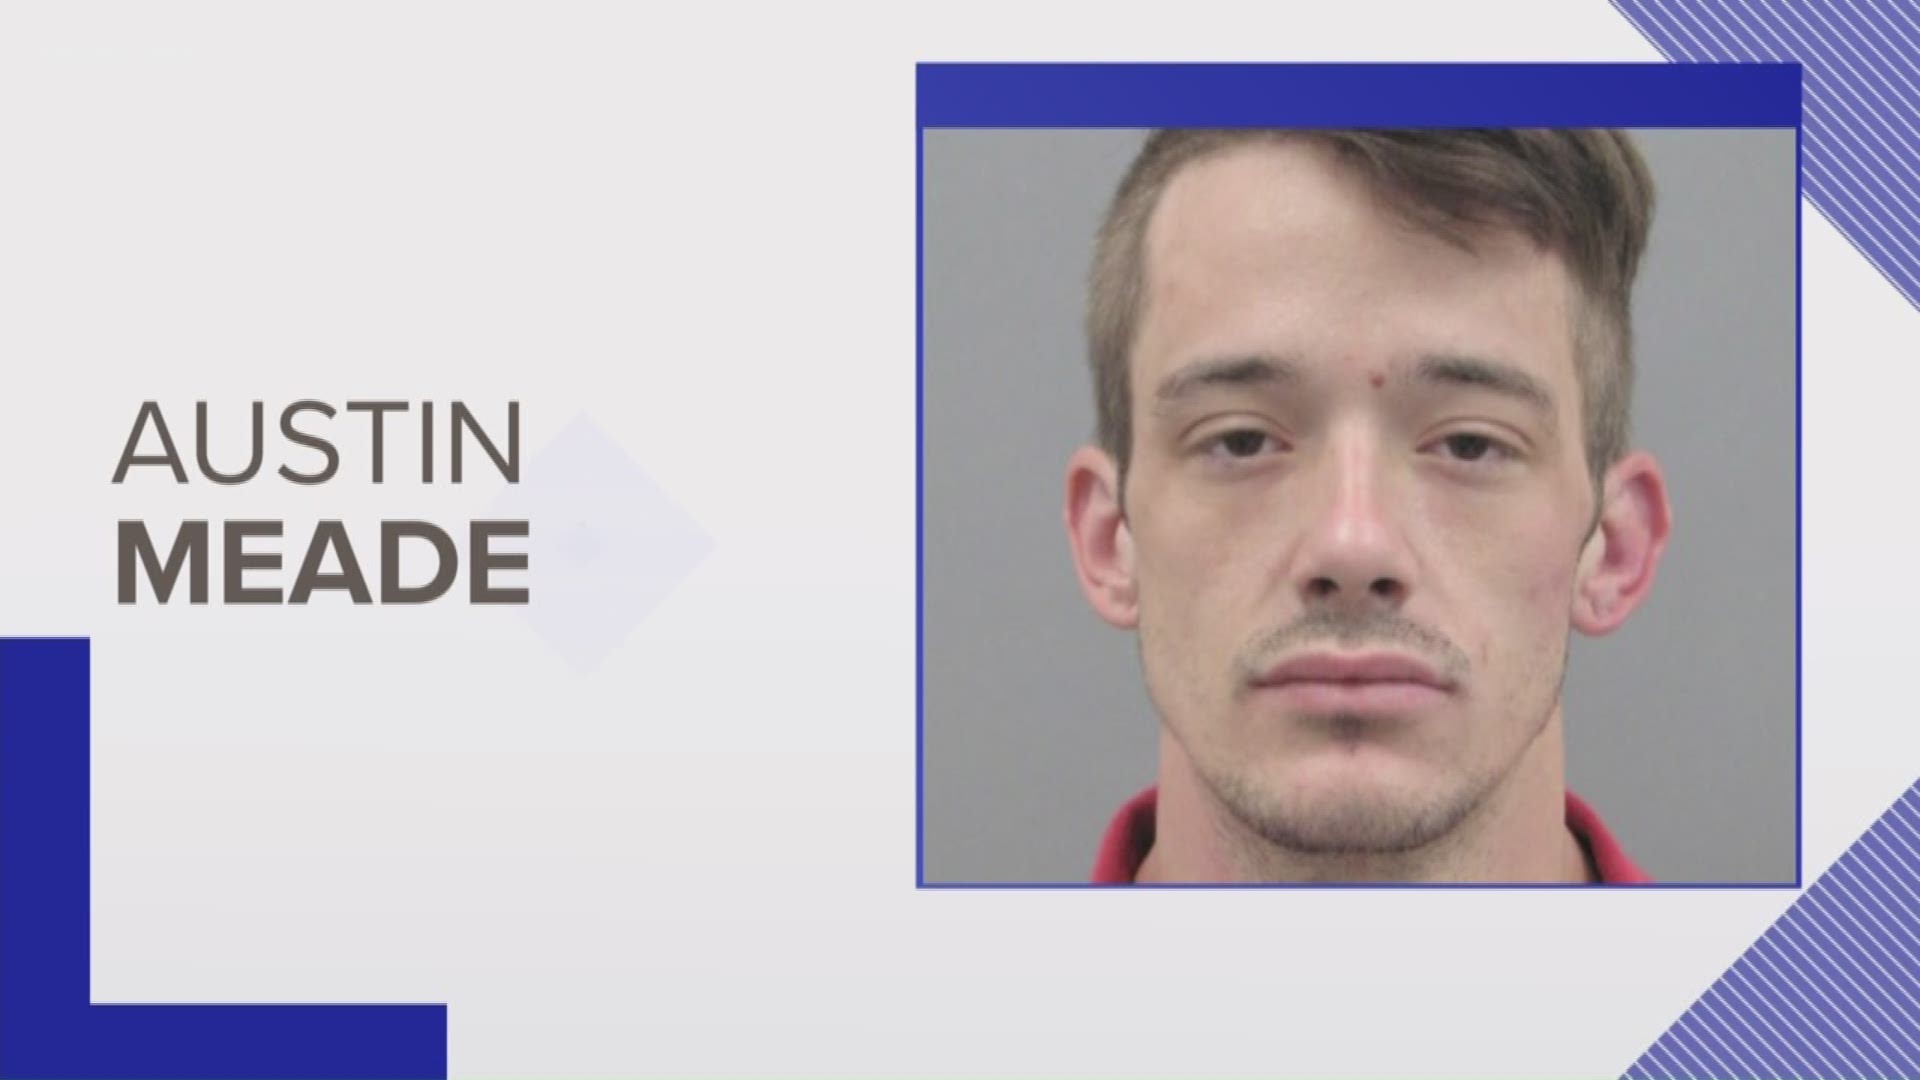 Austin Taylor Meade, 26, of North Las Vegas, Nevada, walked into the Austin Fire Department Friday morning to turn himself in, police confirmed to KVUE. APD said Meade waited at the fire station until police arrived to arrest him.
STORY: http://www.kvue.c